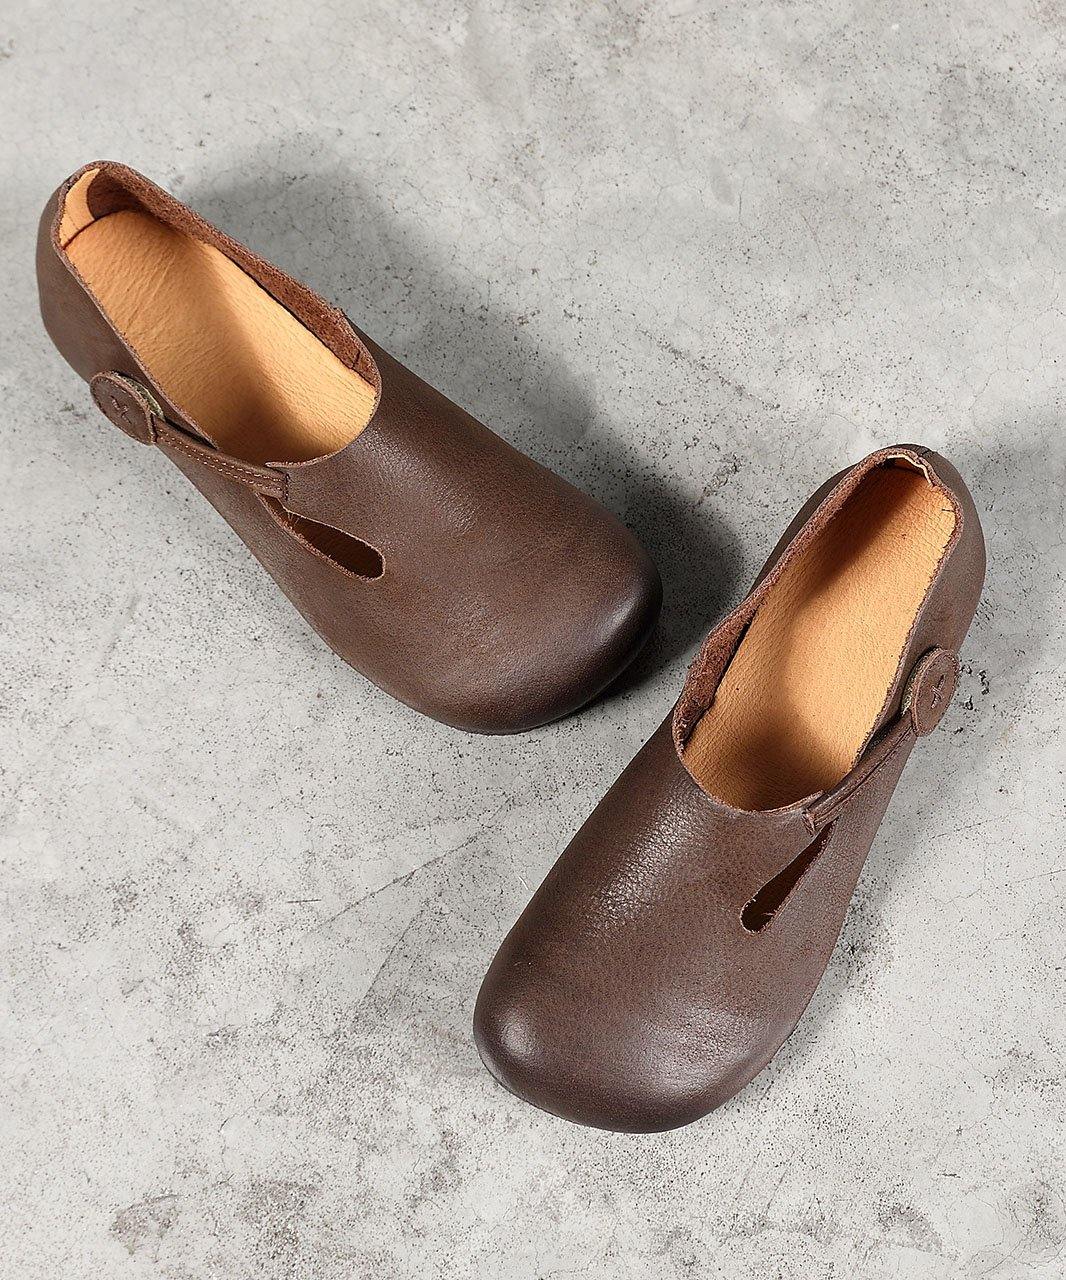 Women Chocolate Flat Shoes For Women Cowhide Leather